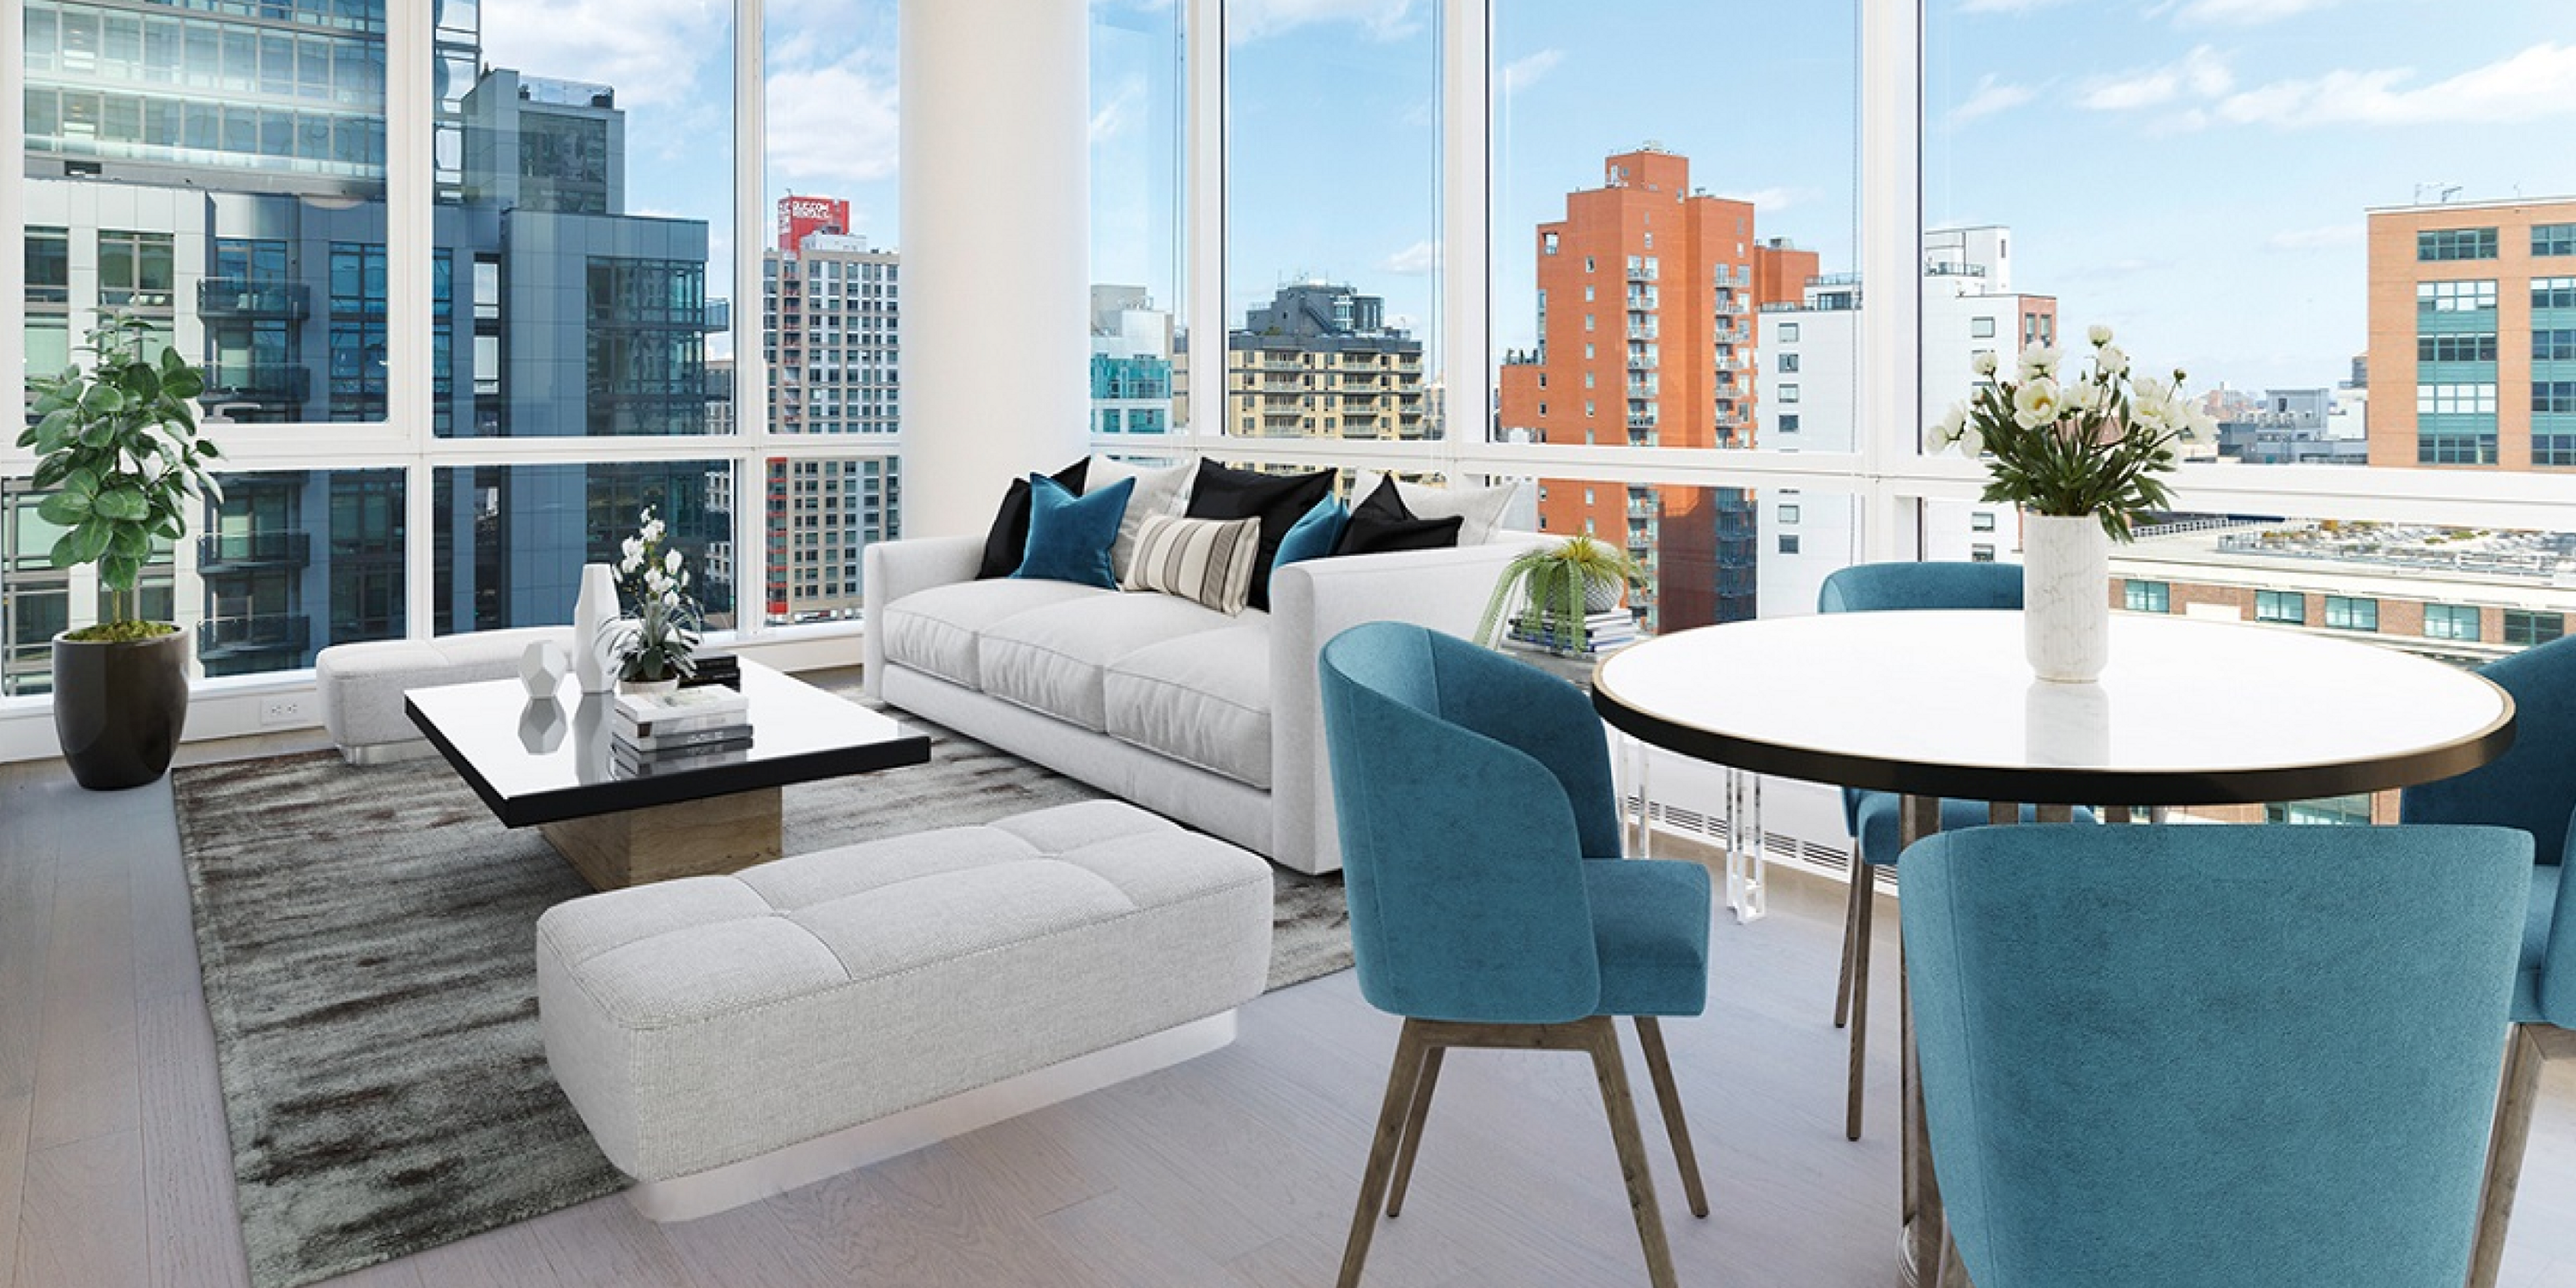 Living room area with couch, coffee table, and view of the city